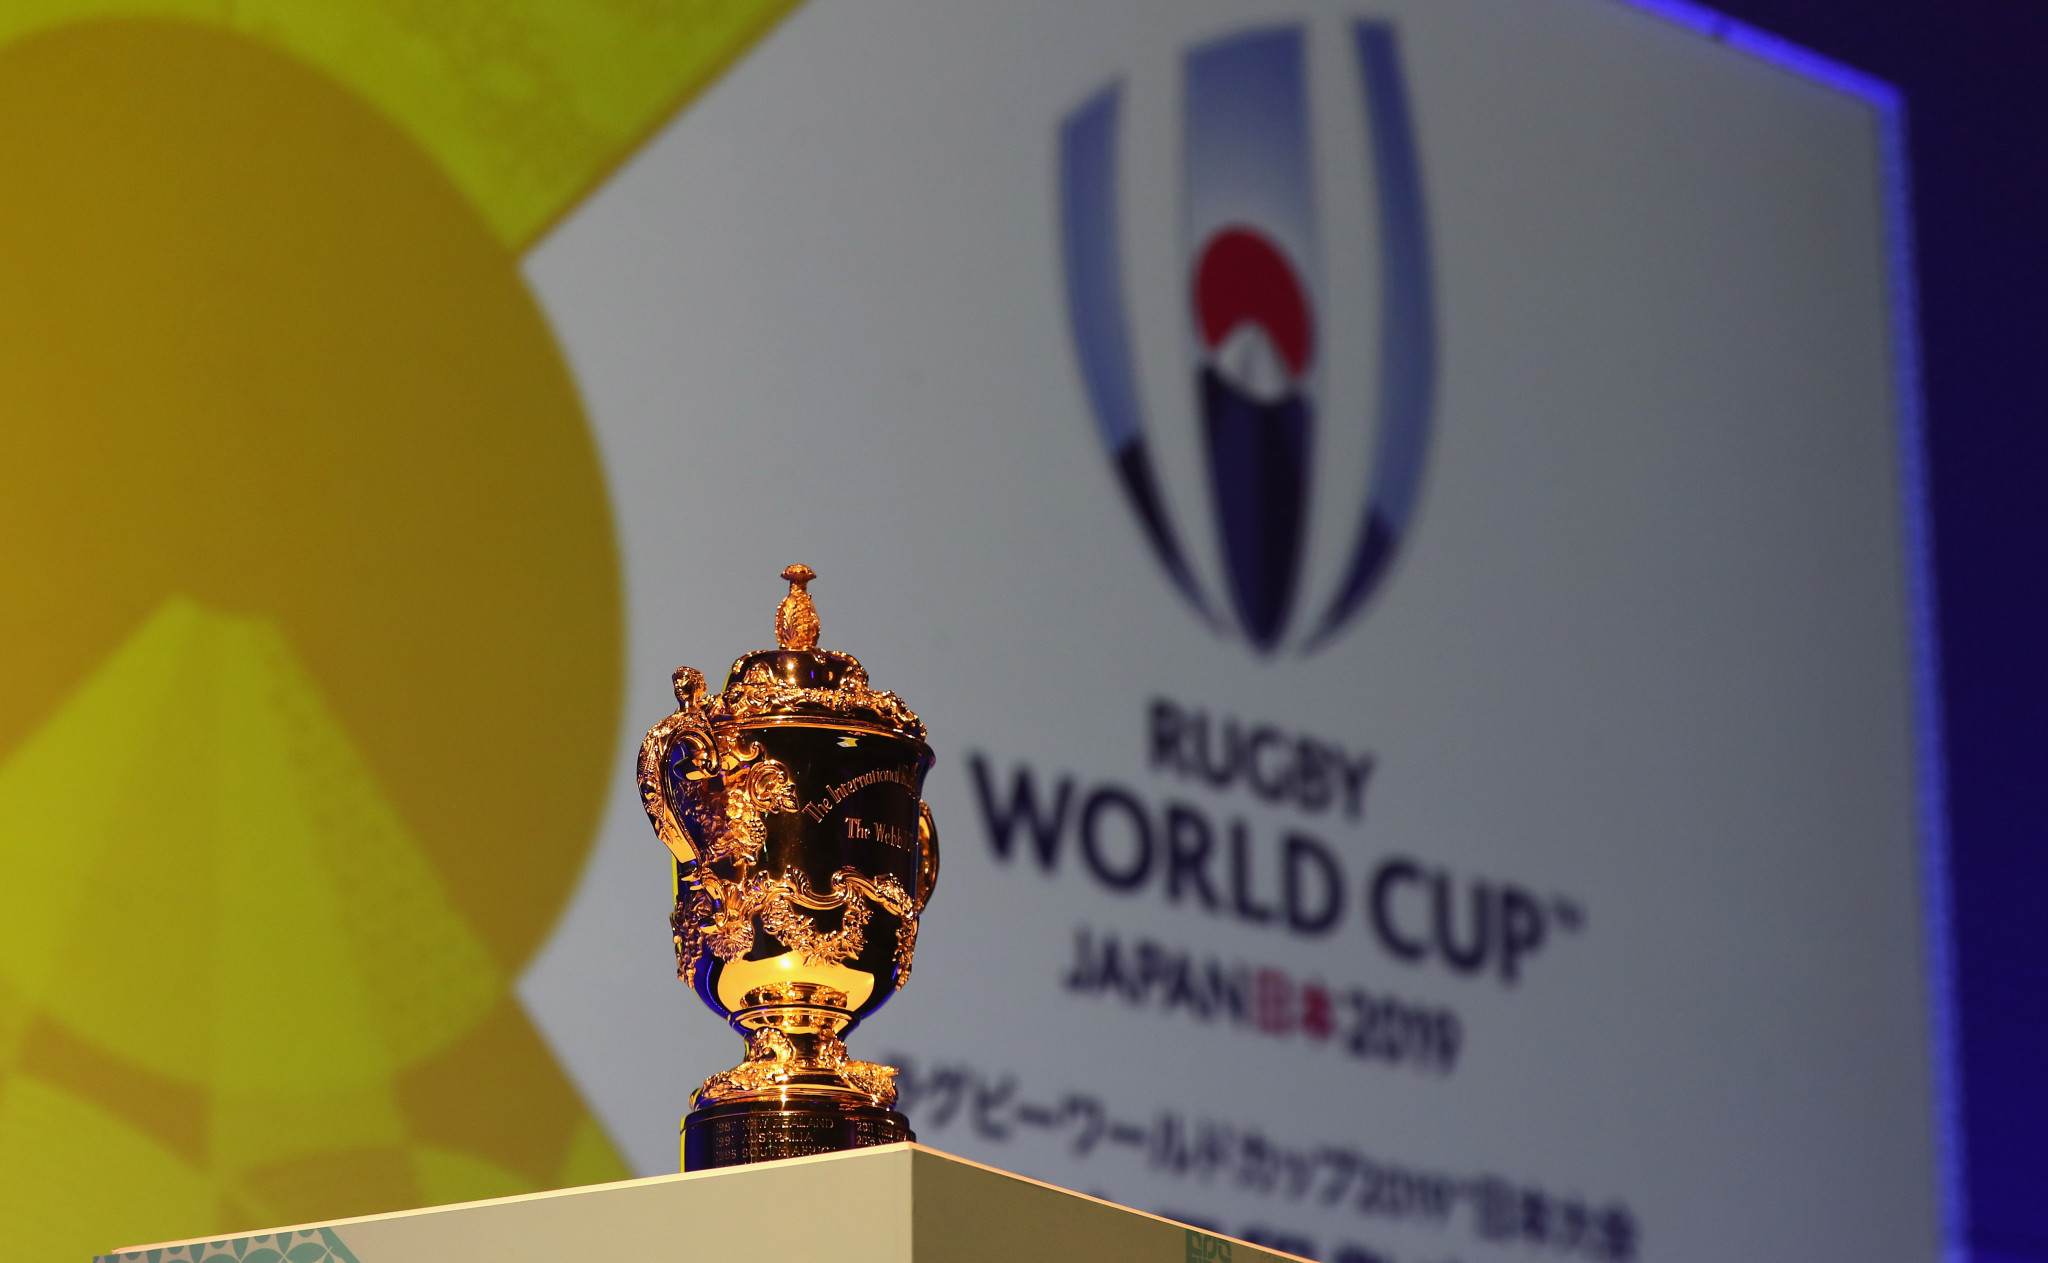 World Rugby claim 2019 World Cup will deliver record economic benefits to Japan